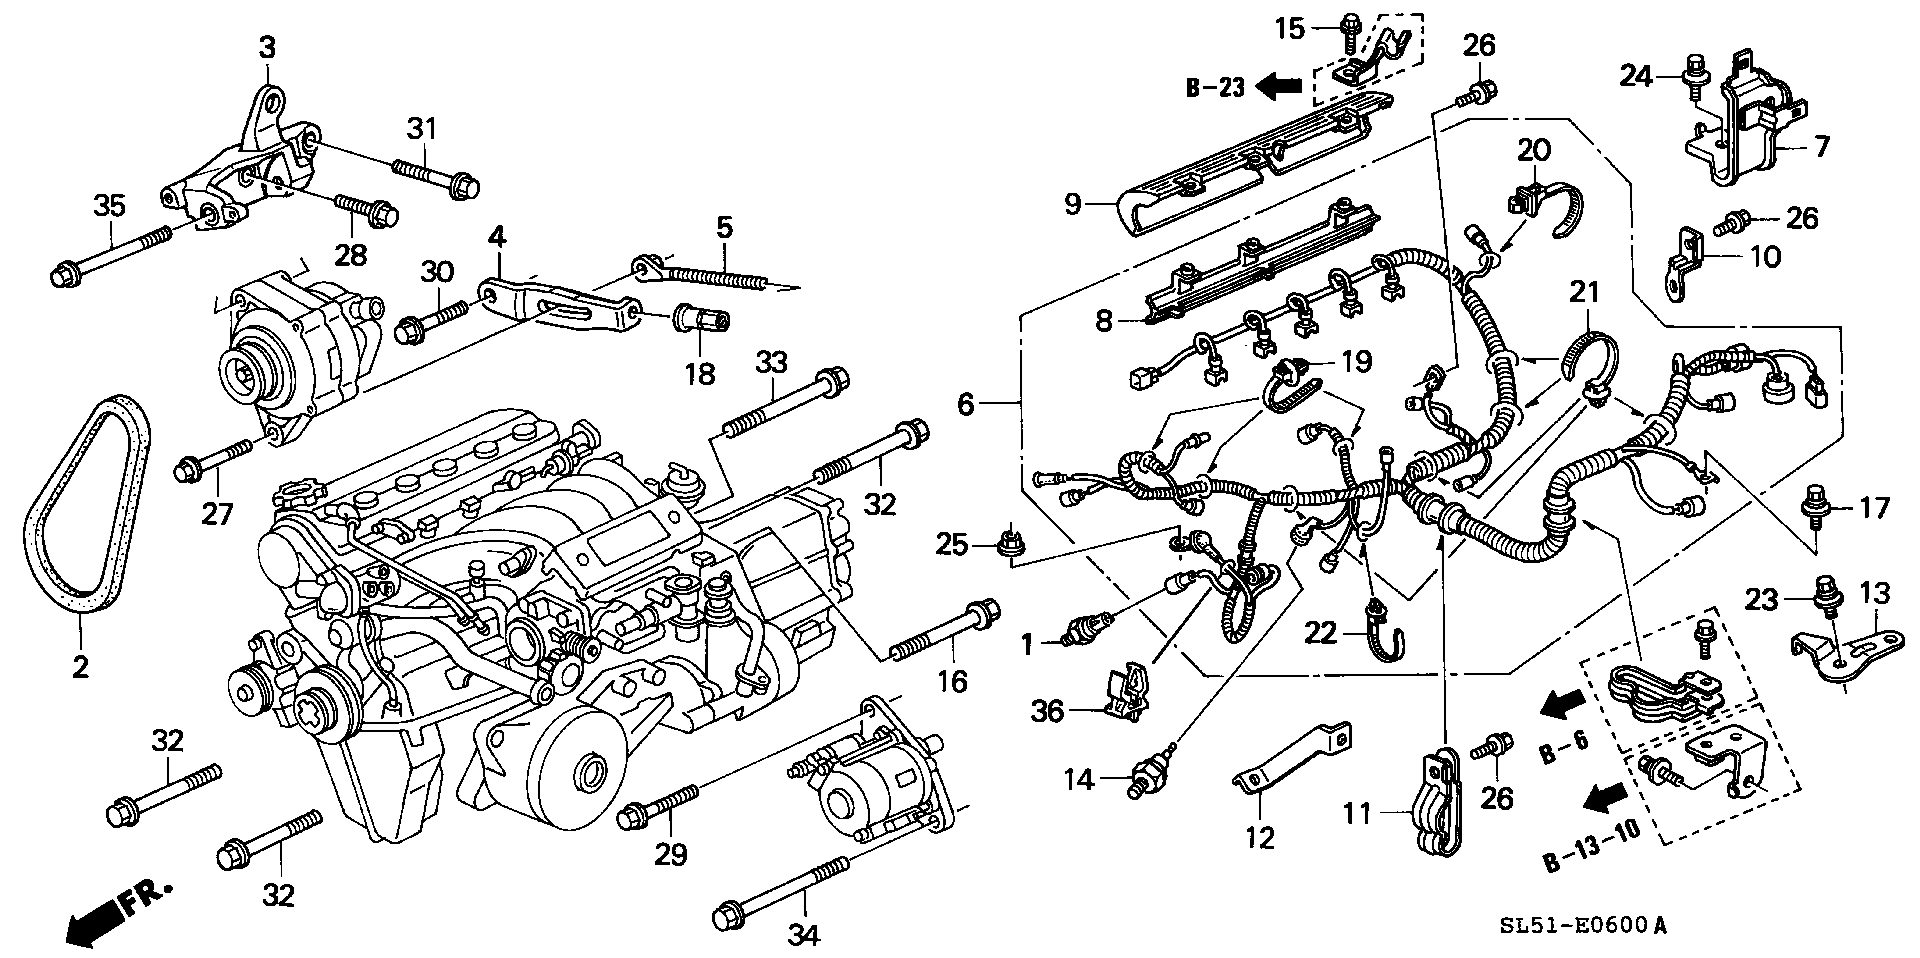 ENGINE WIRE HARNESS/ CLAMP